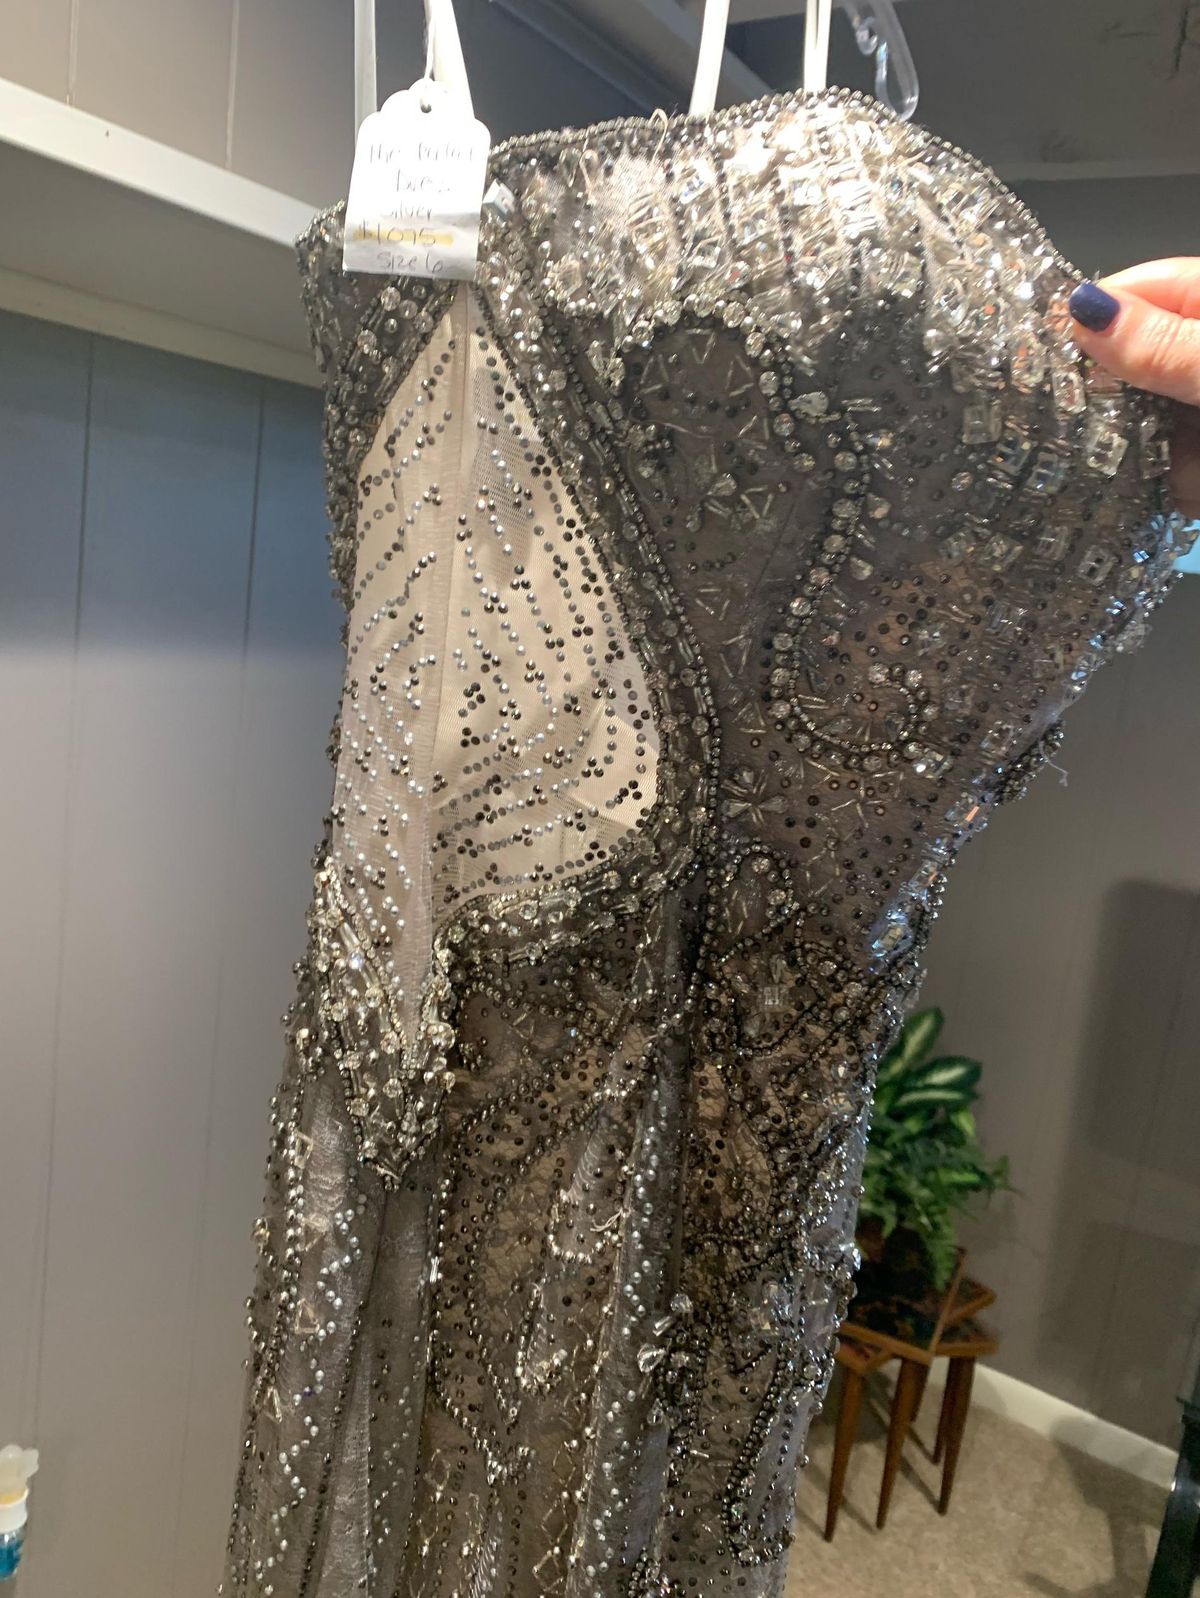 Terani Couture Size 6 Sequined Silver Mermaid Dress on Queenly